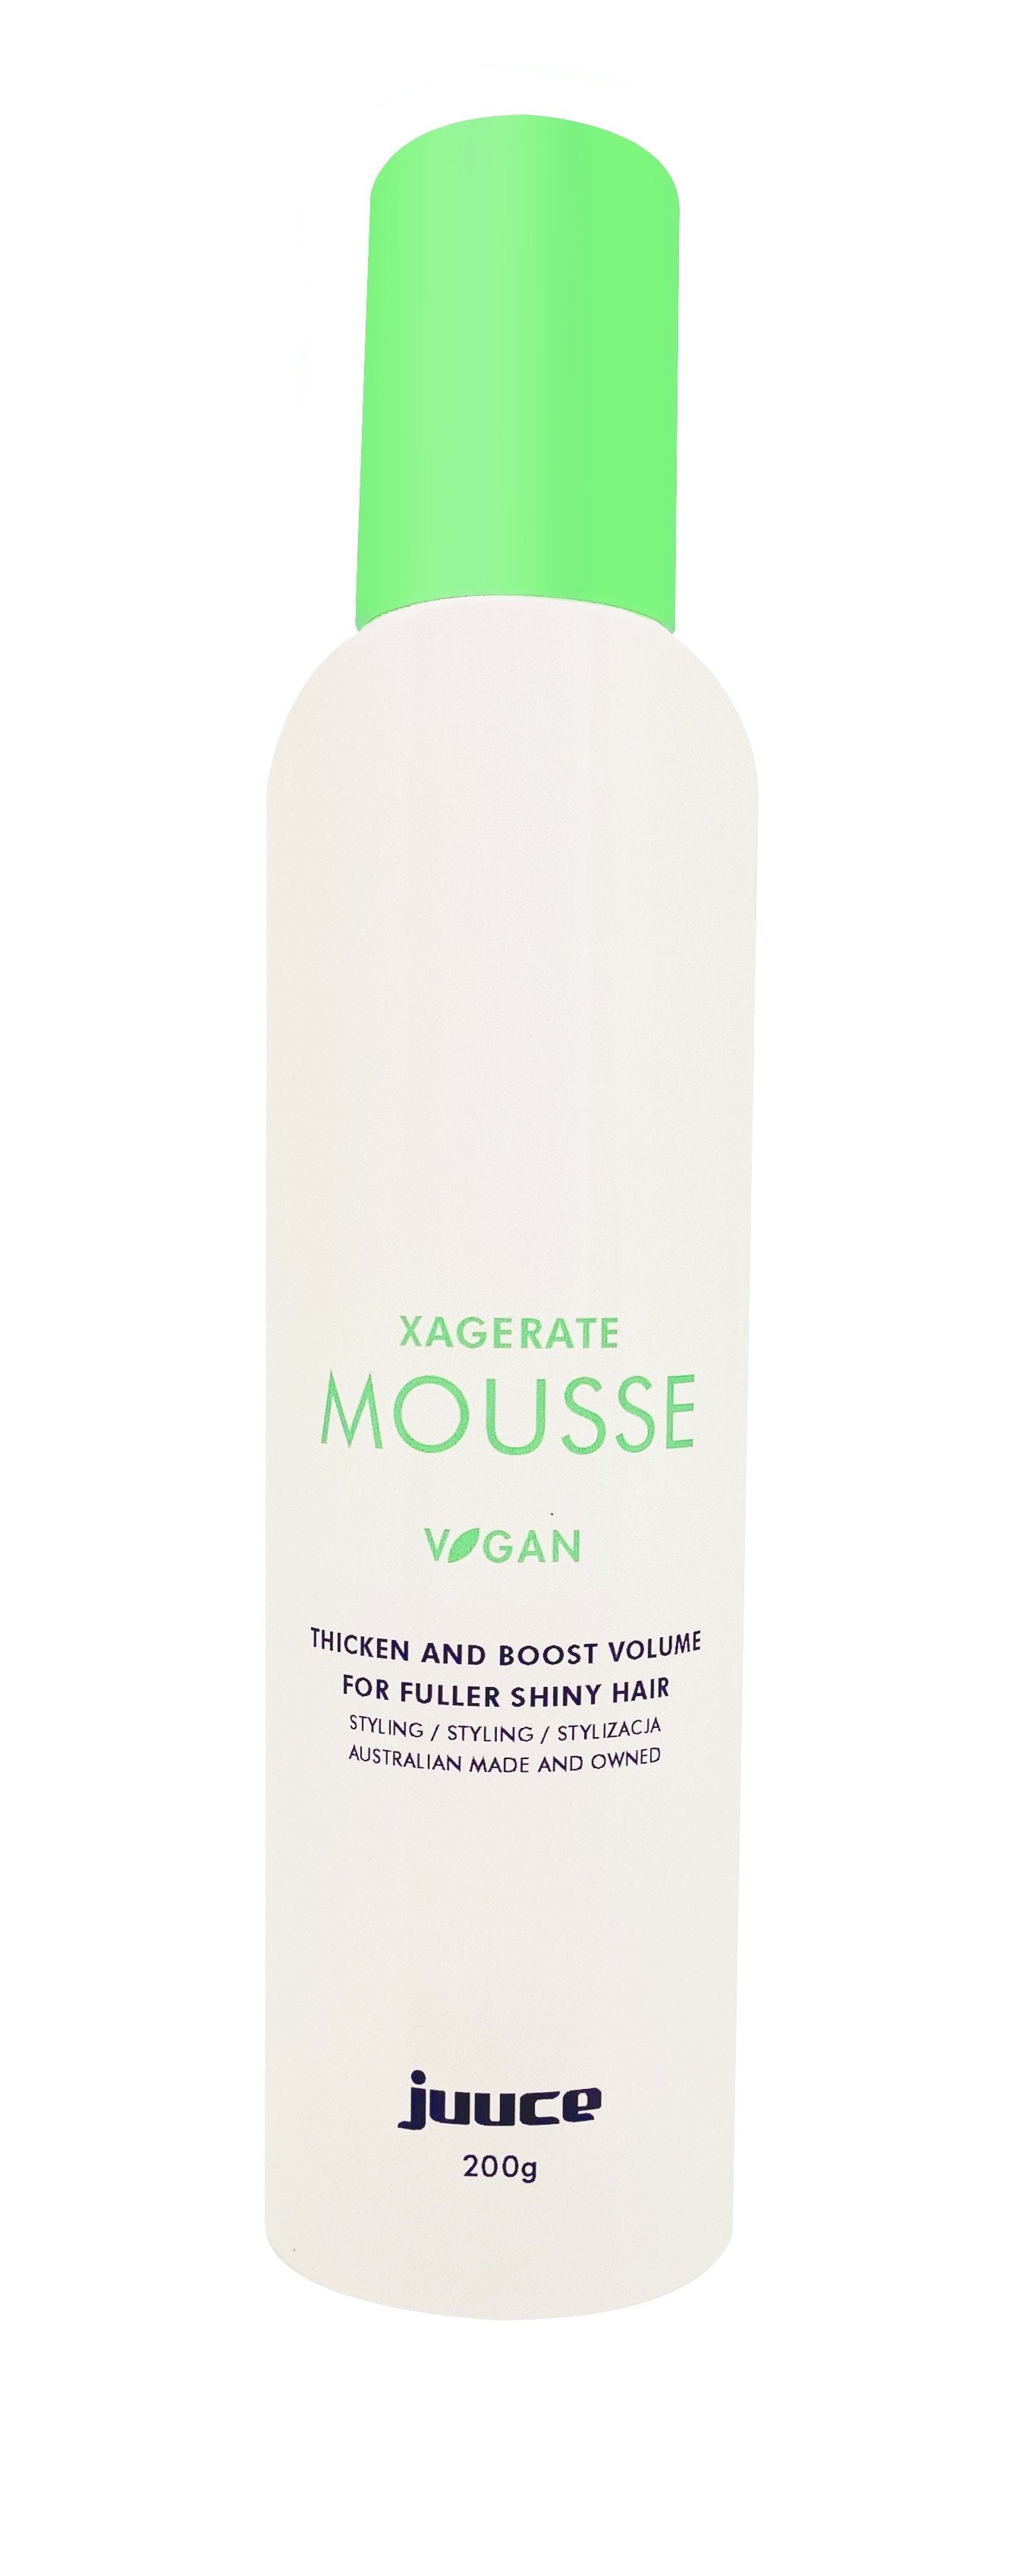 Xagerate Mousse 200g